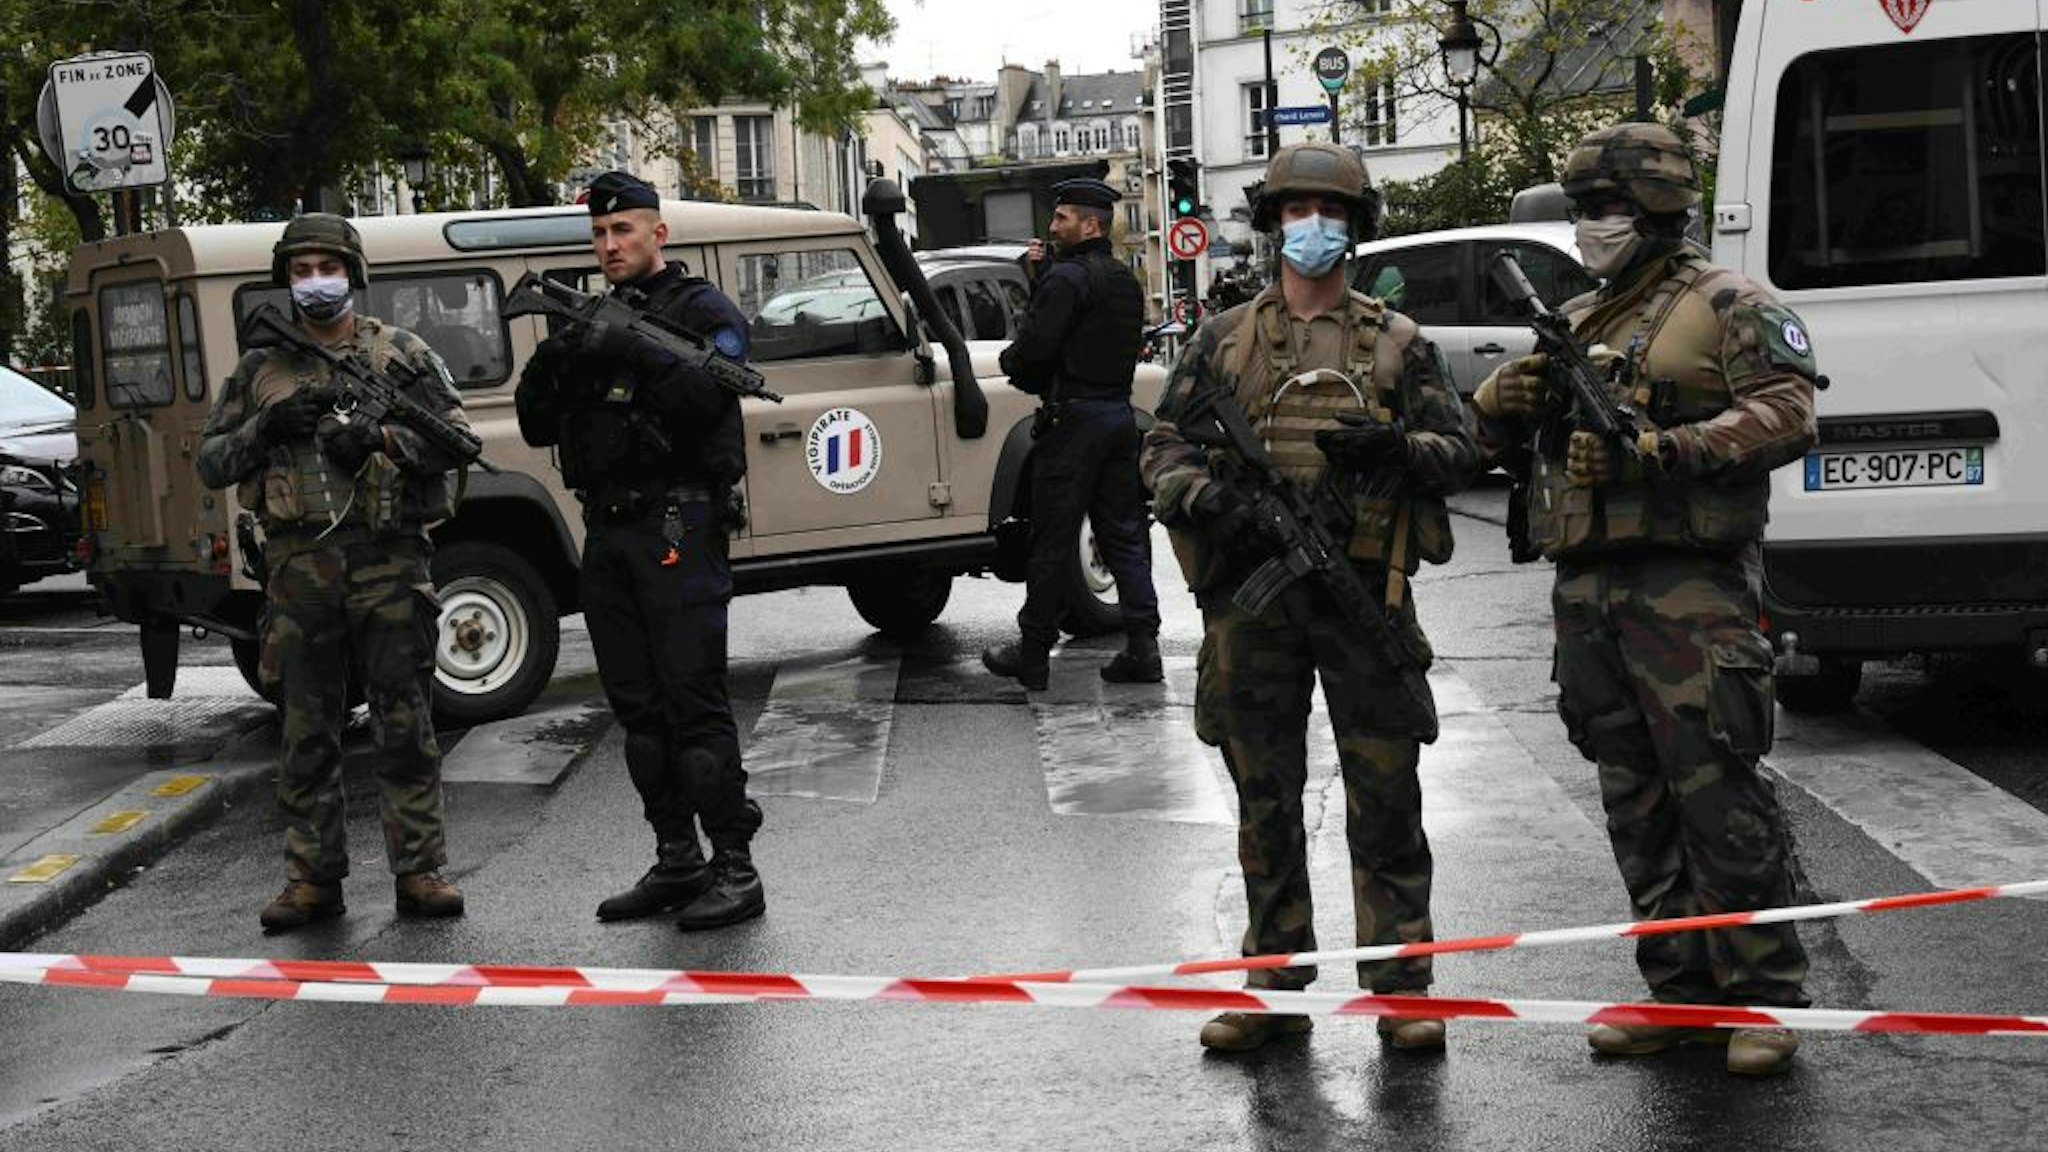 Officers of the French National Gendarmerie stand guard after a man armed with a knife attacked people near the former offices of the satirical magazine Charlie Hebdo on September 25, 2020 in Paris, France.